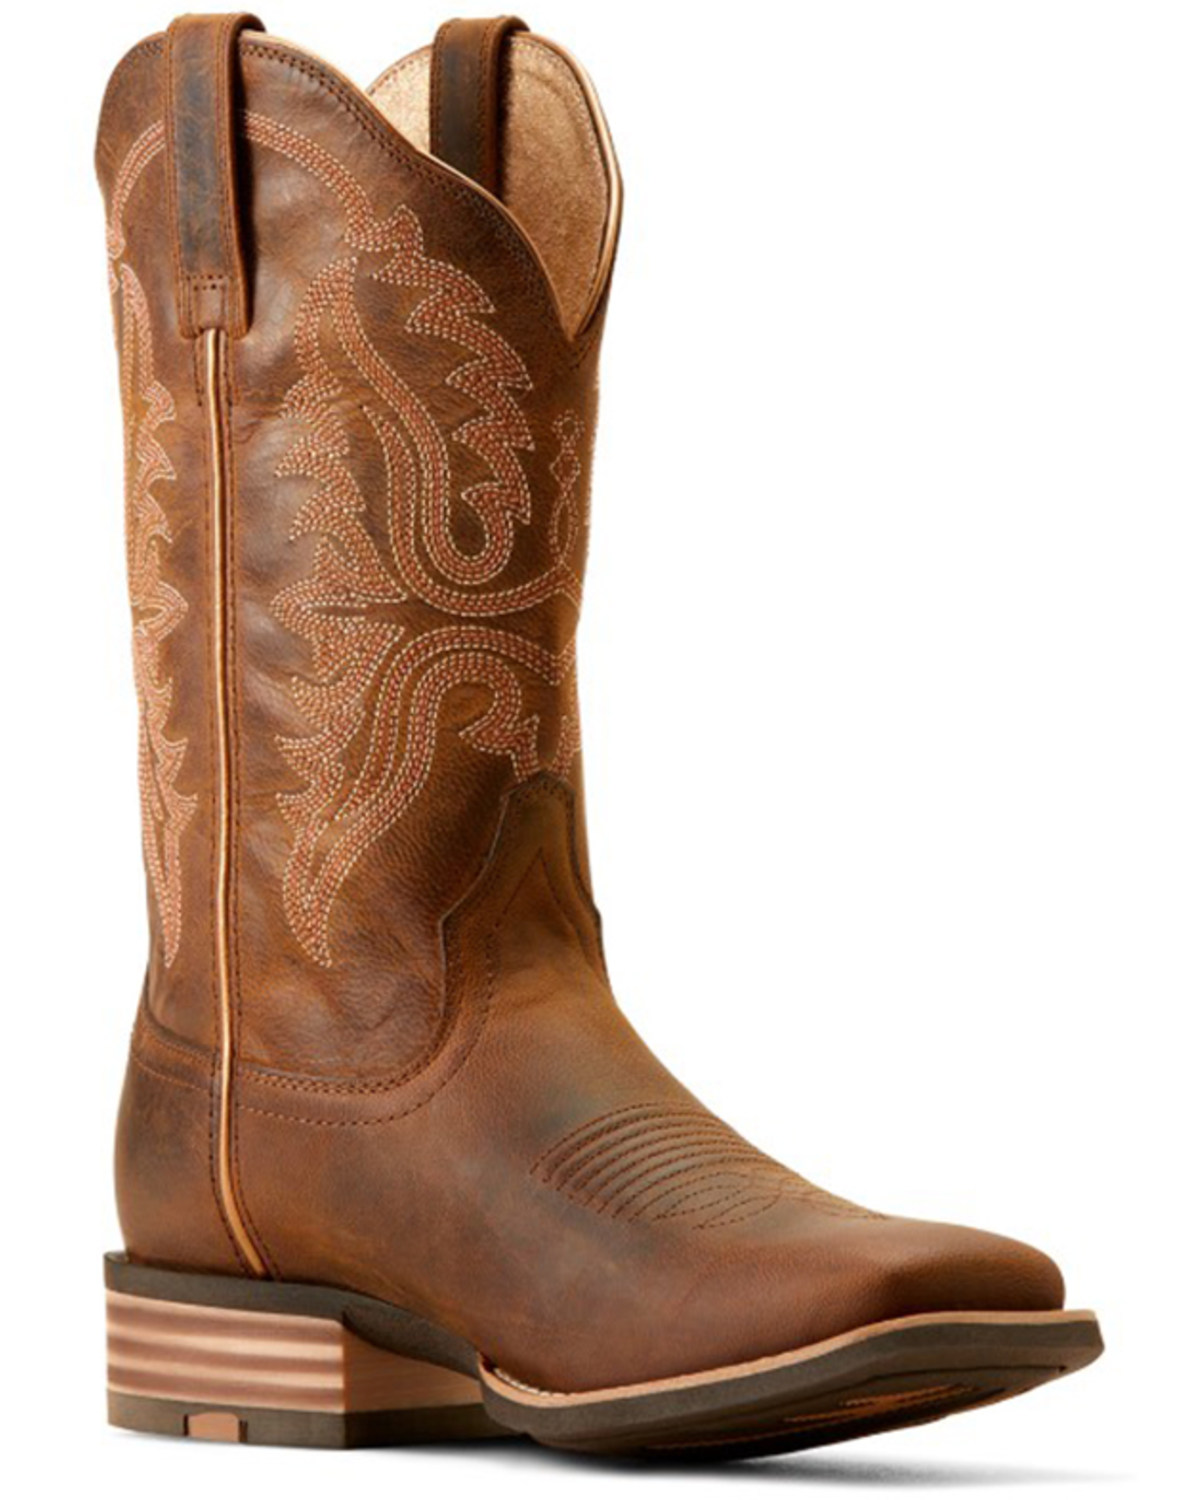 Ariat Women's Olena Performance Western Boots - Broad Square Toe